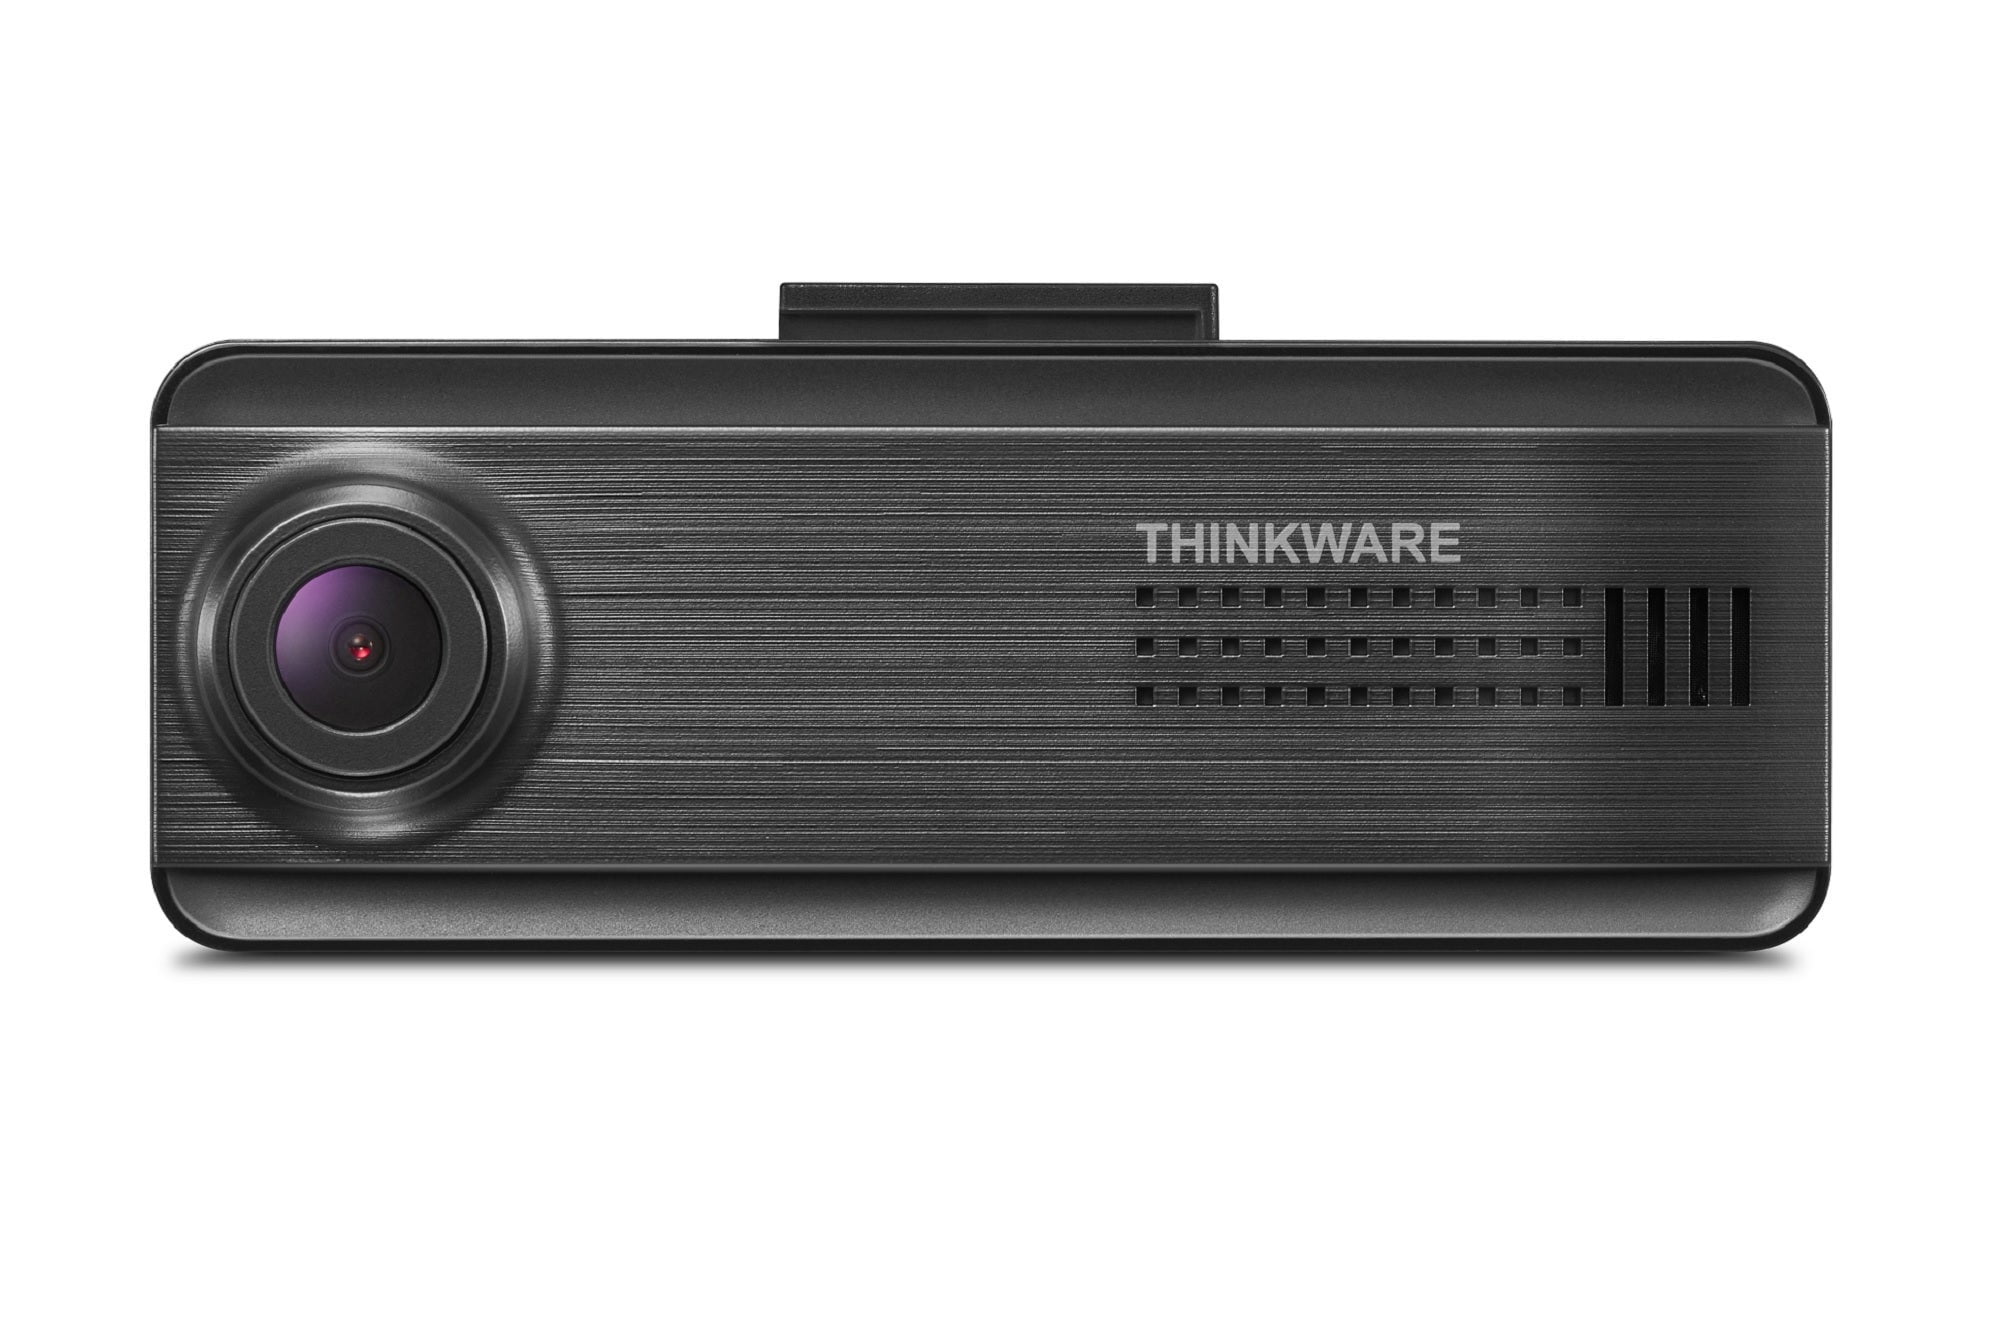 Thinkware F200 Pro dash cam review: Detailed video in a super-small form factor